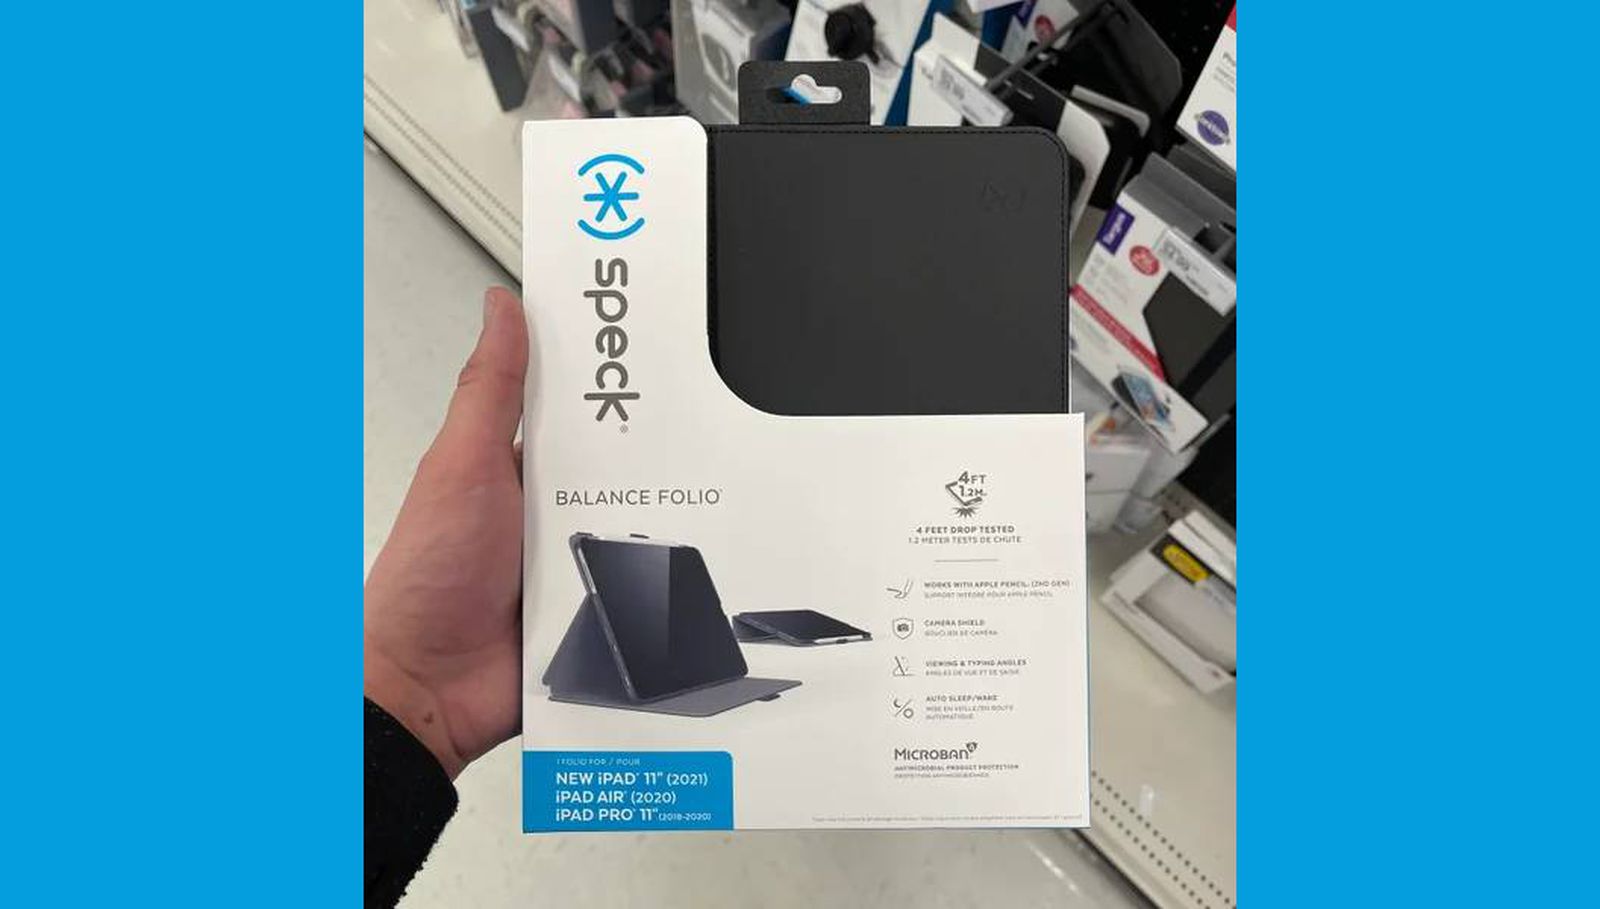 IPad Pro 2021 case found at Target while rumors about the next update